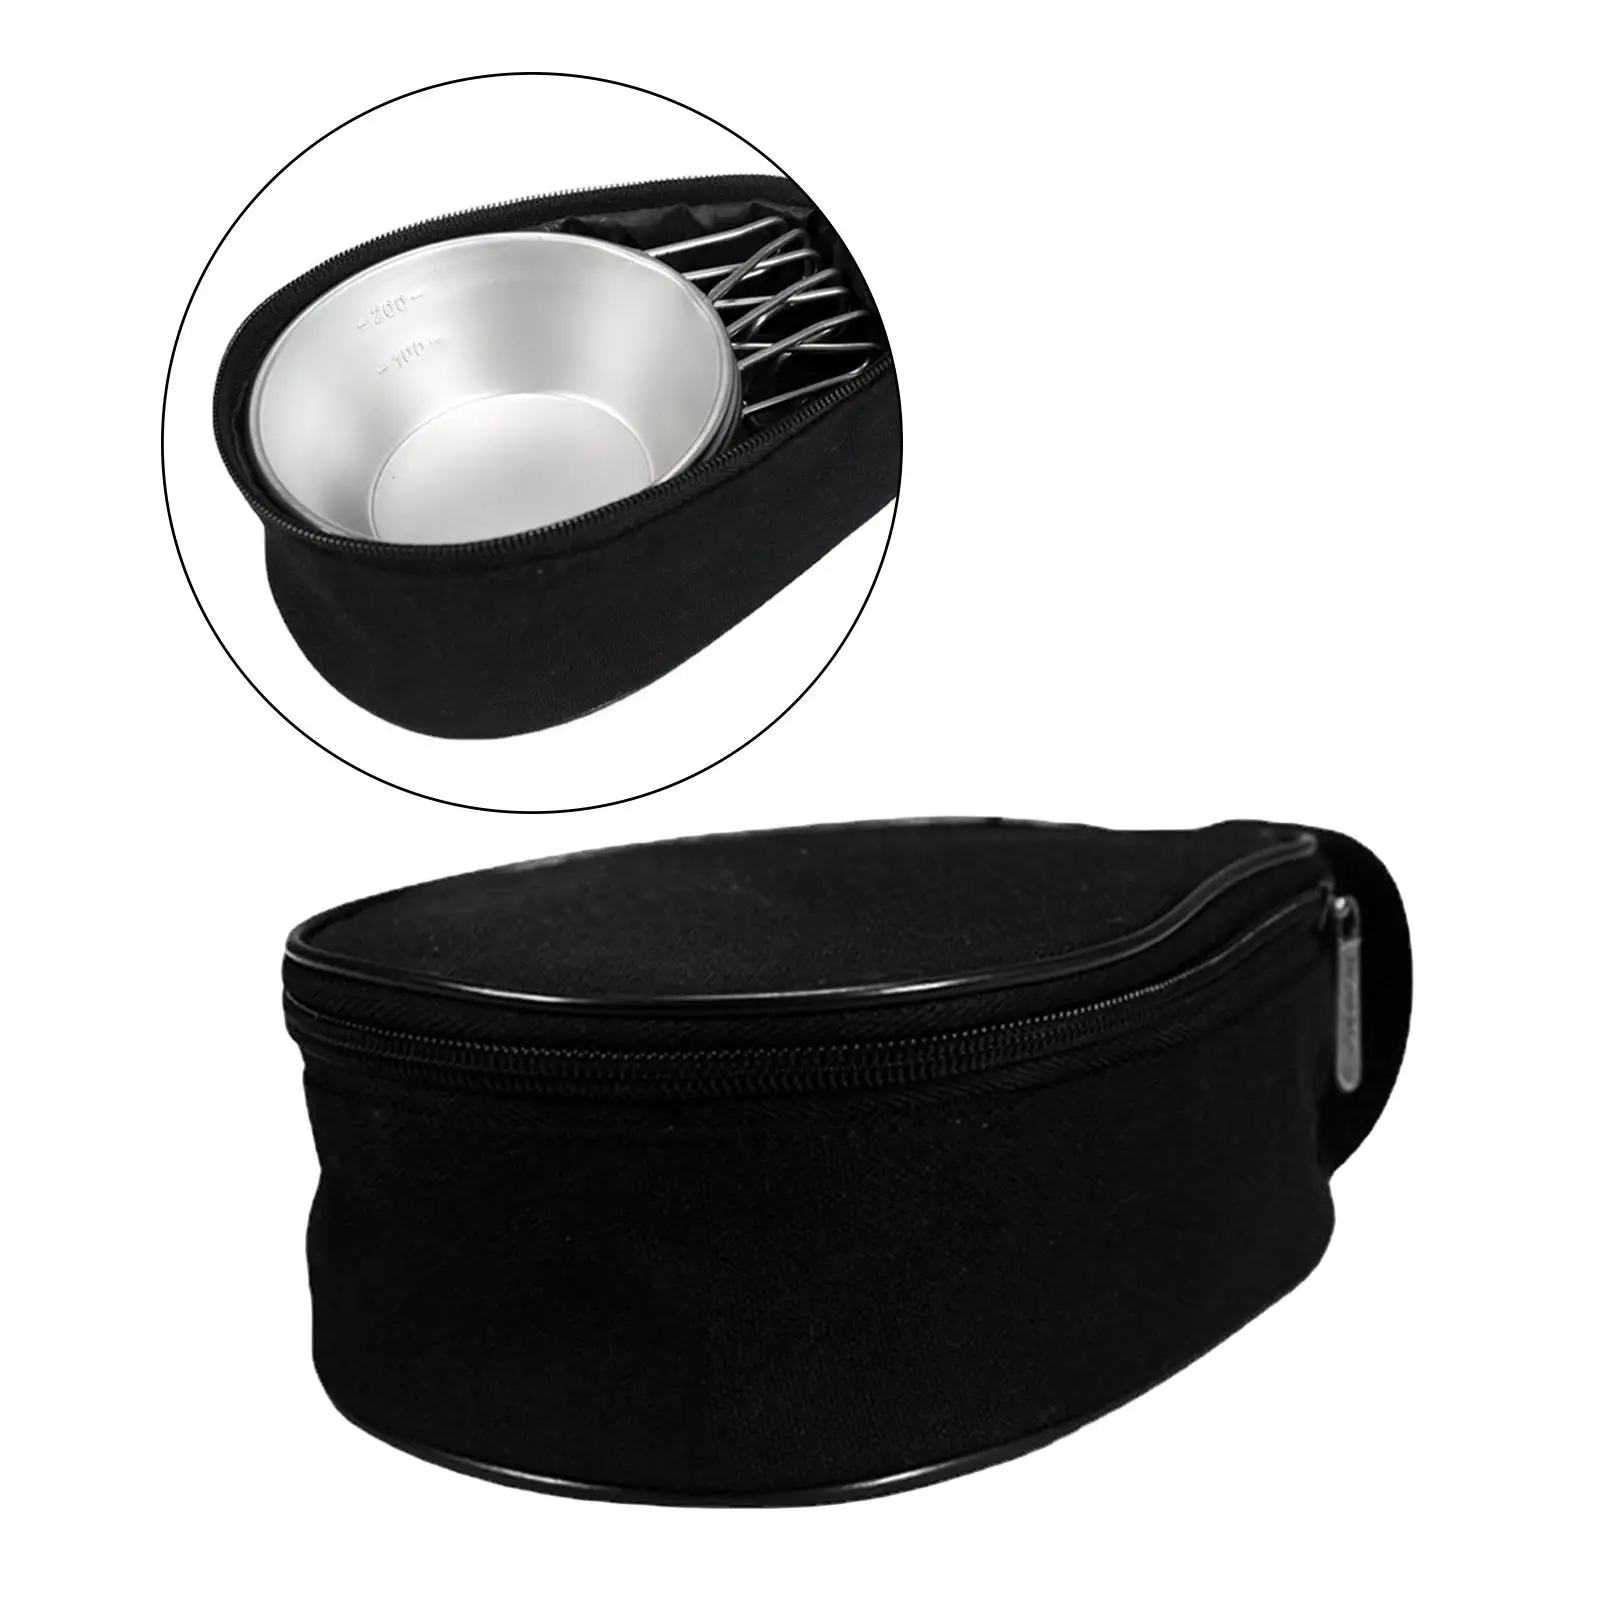 Tableware Bowl Bag Carry Case Activities Reusable Flatware Organizer Carrier Container Dinnerware for Outdoor Barbecue Equipment